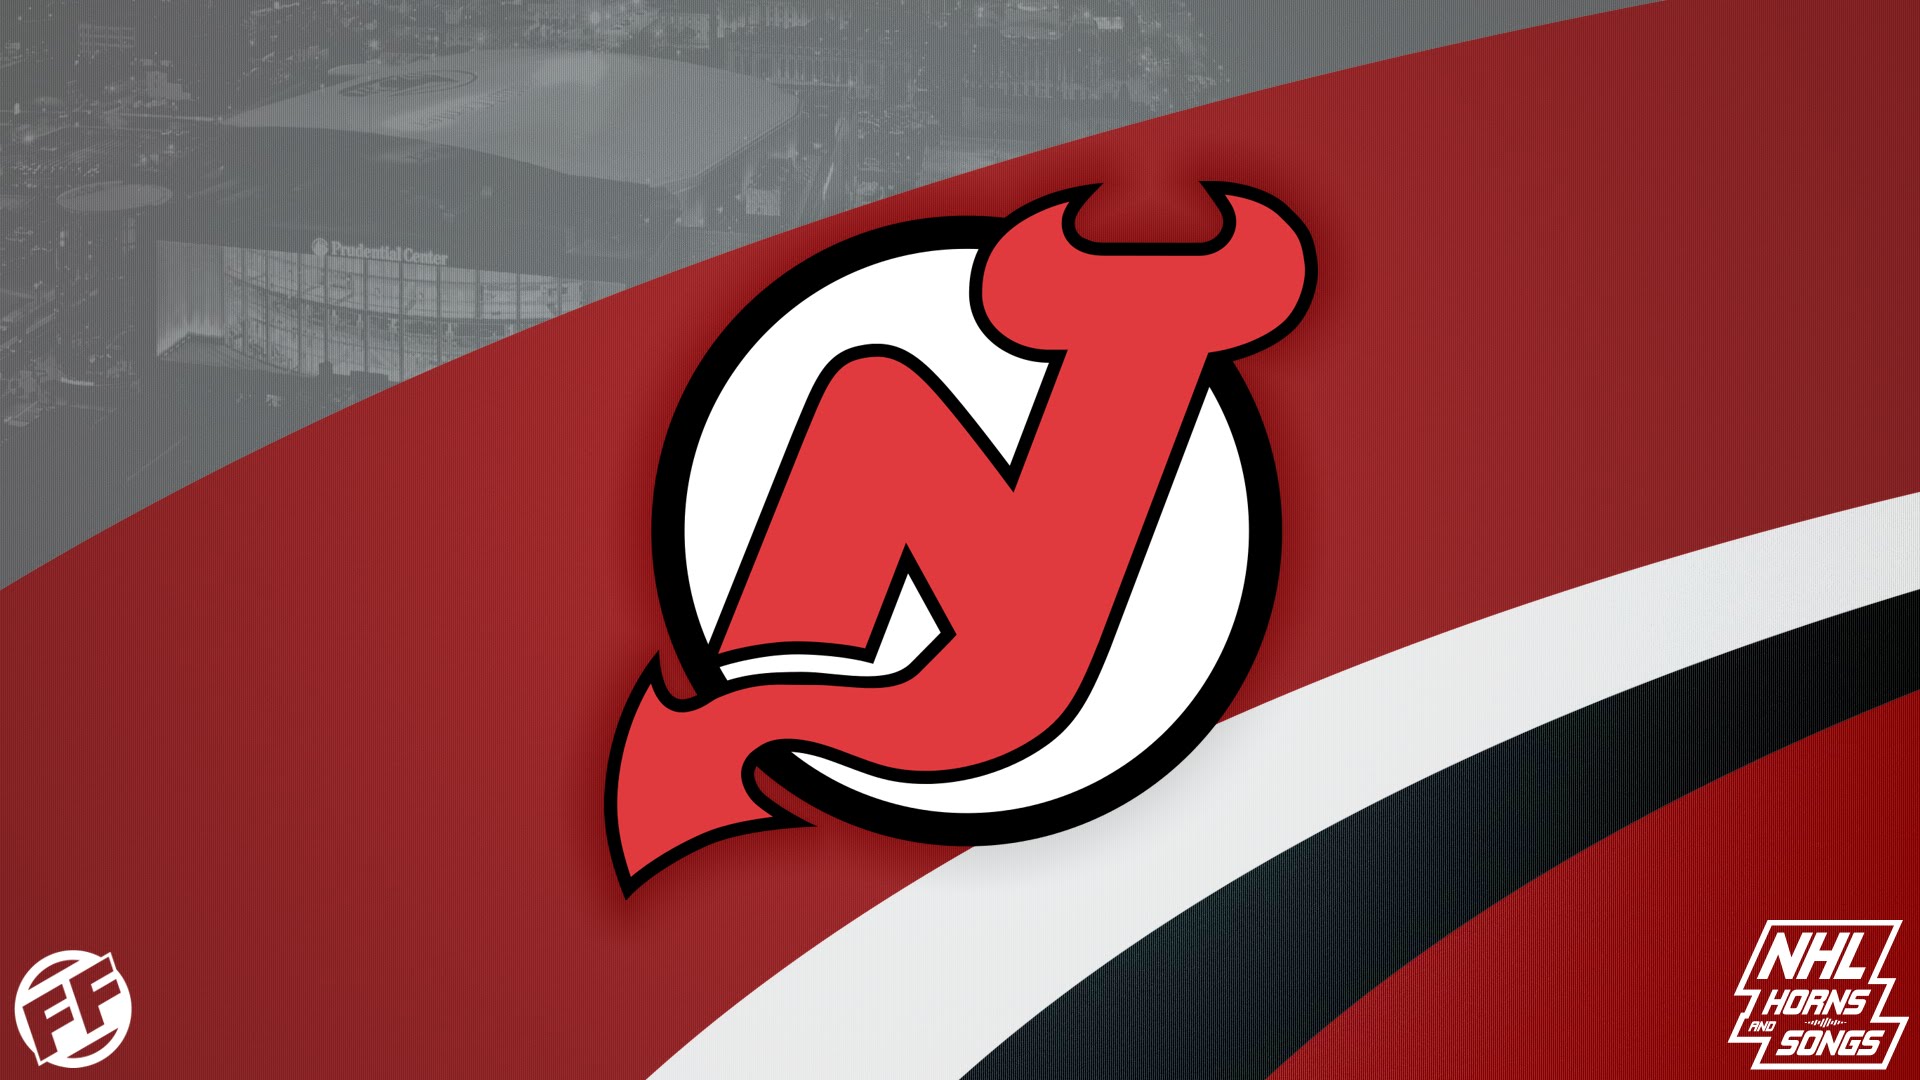 New Jersey Devils wallpaper by iliketeens  Download on ZEDGE  8eb3